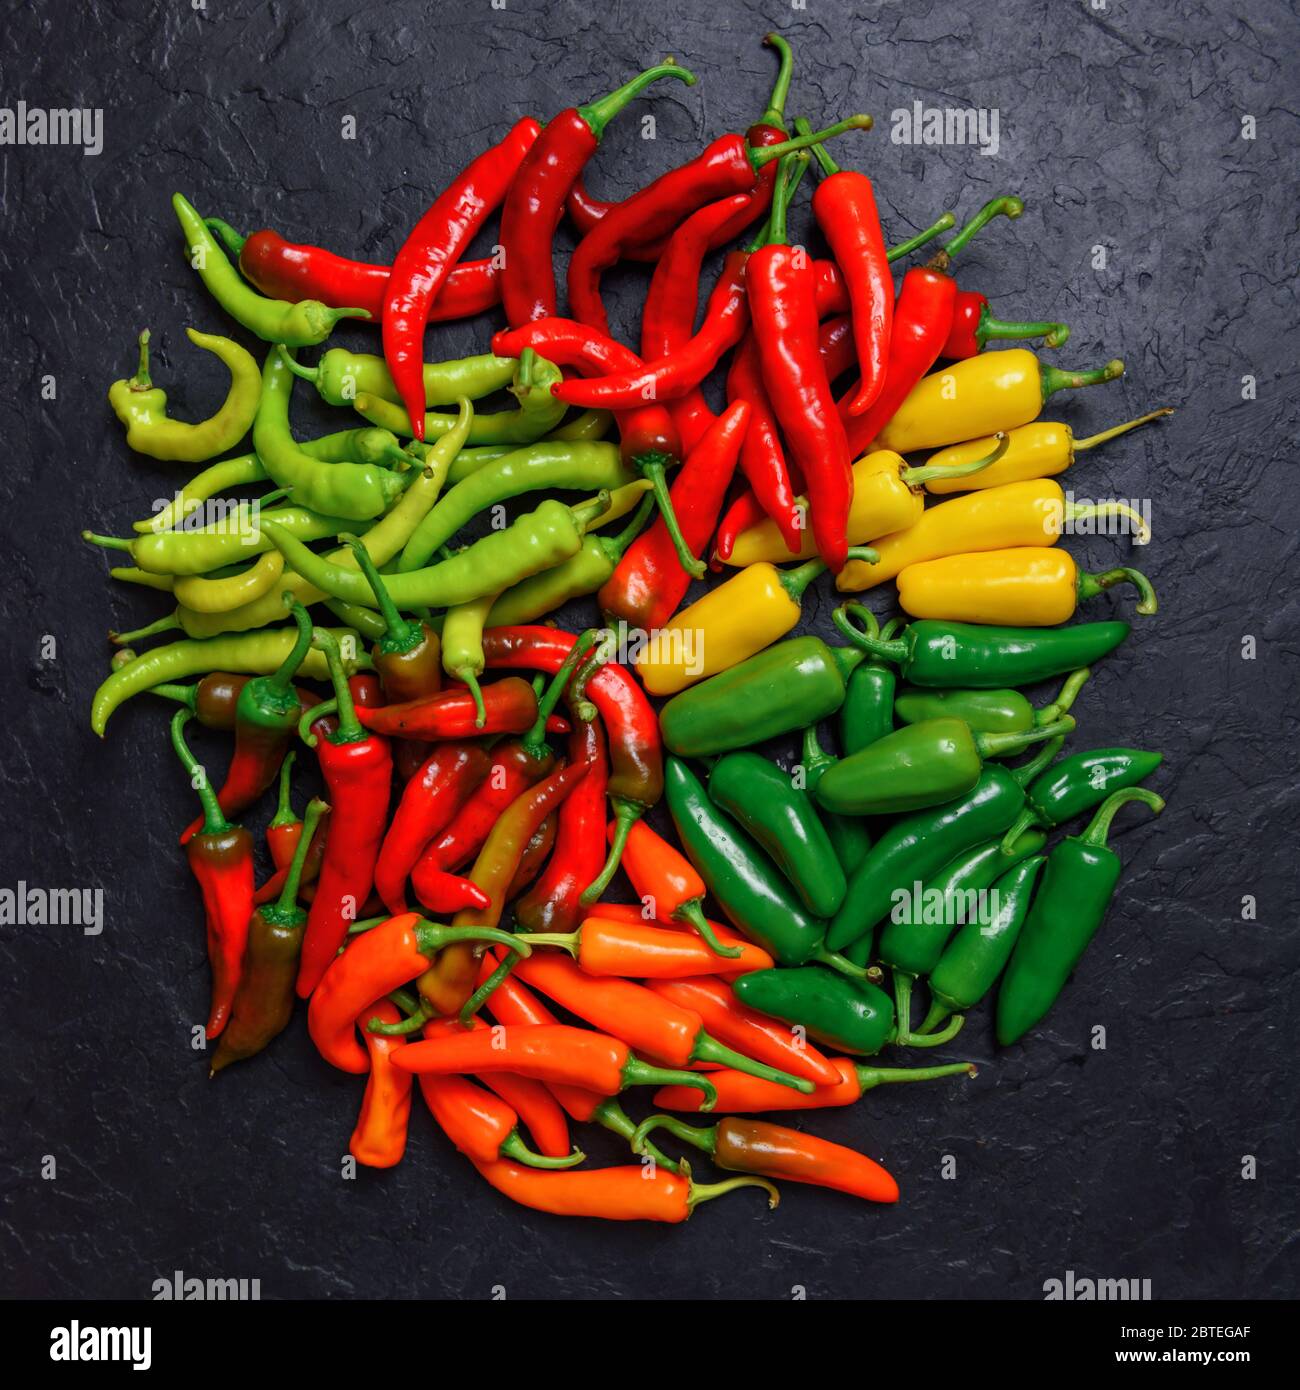 Different colors hot peppers on black background closeup. Food photography Stock Photo